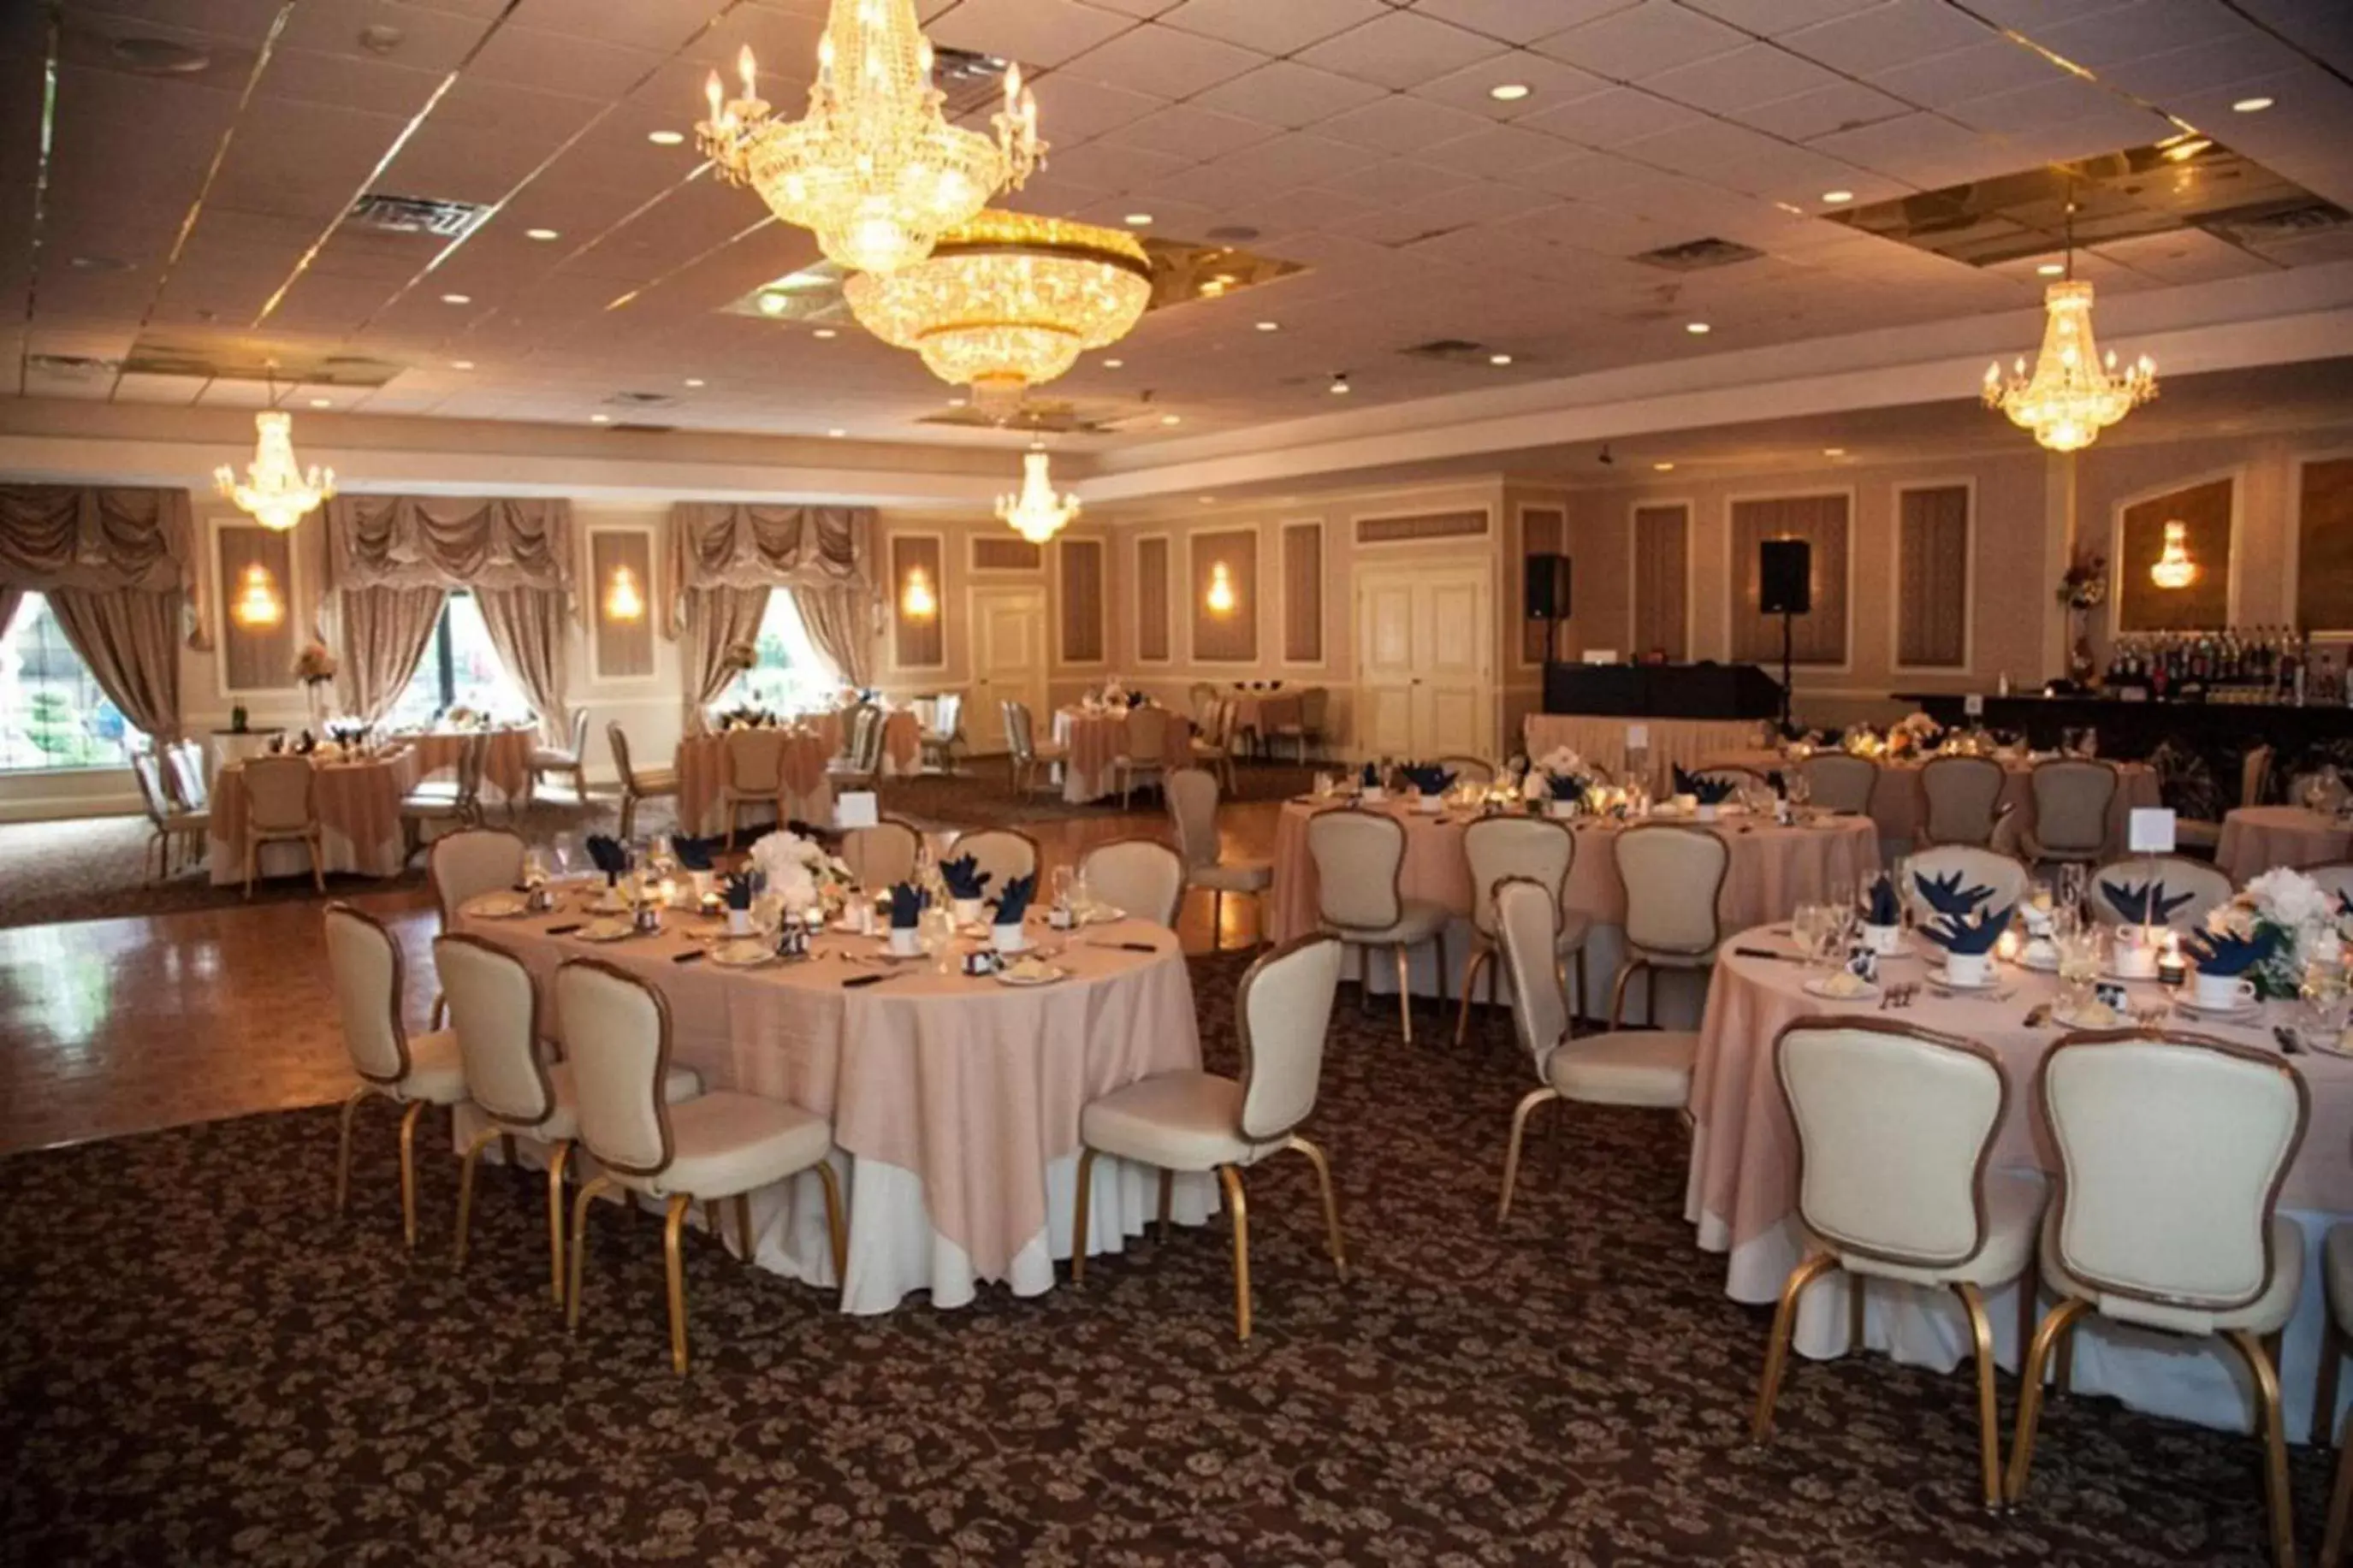 Banquet/Function facilities, Banquet Facilities in The Poughkeepsie Grand Hotel